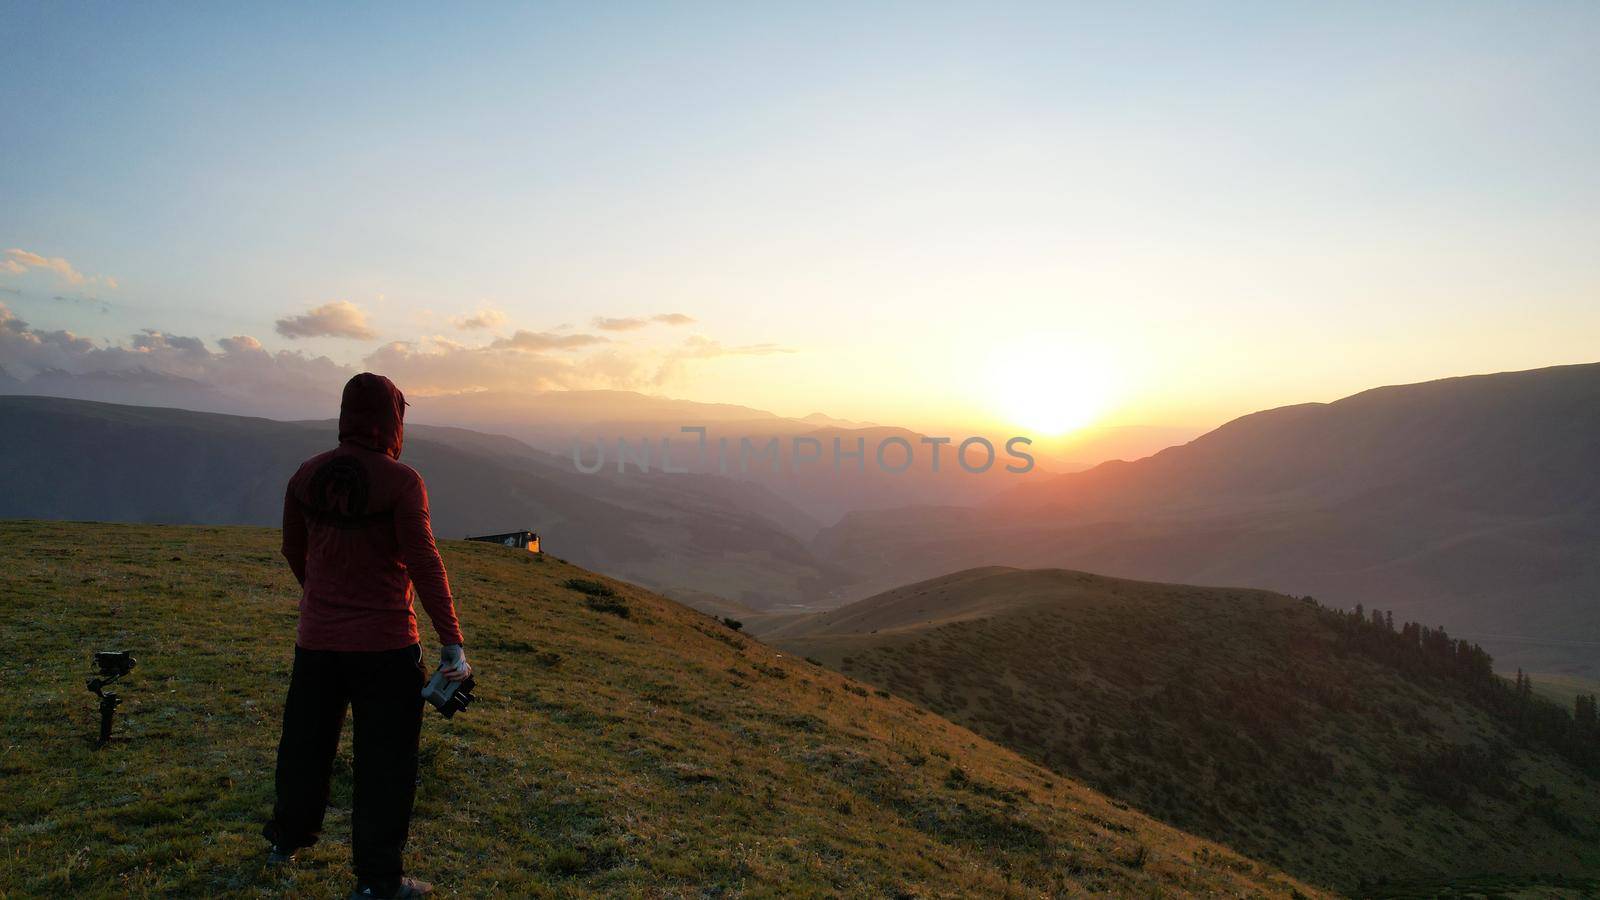 A guy in the mountains is watching the sunset by Passcal